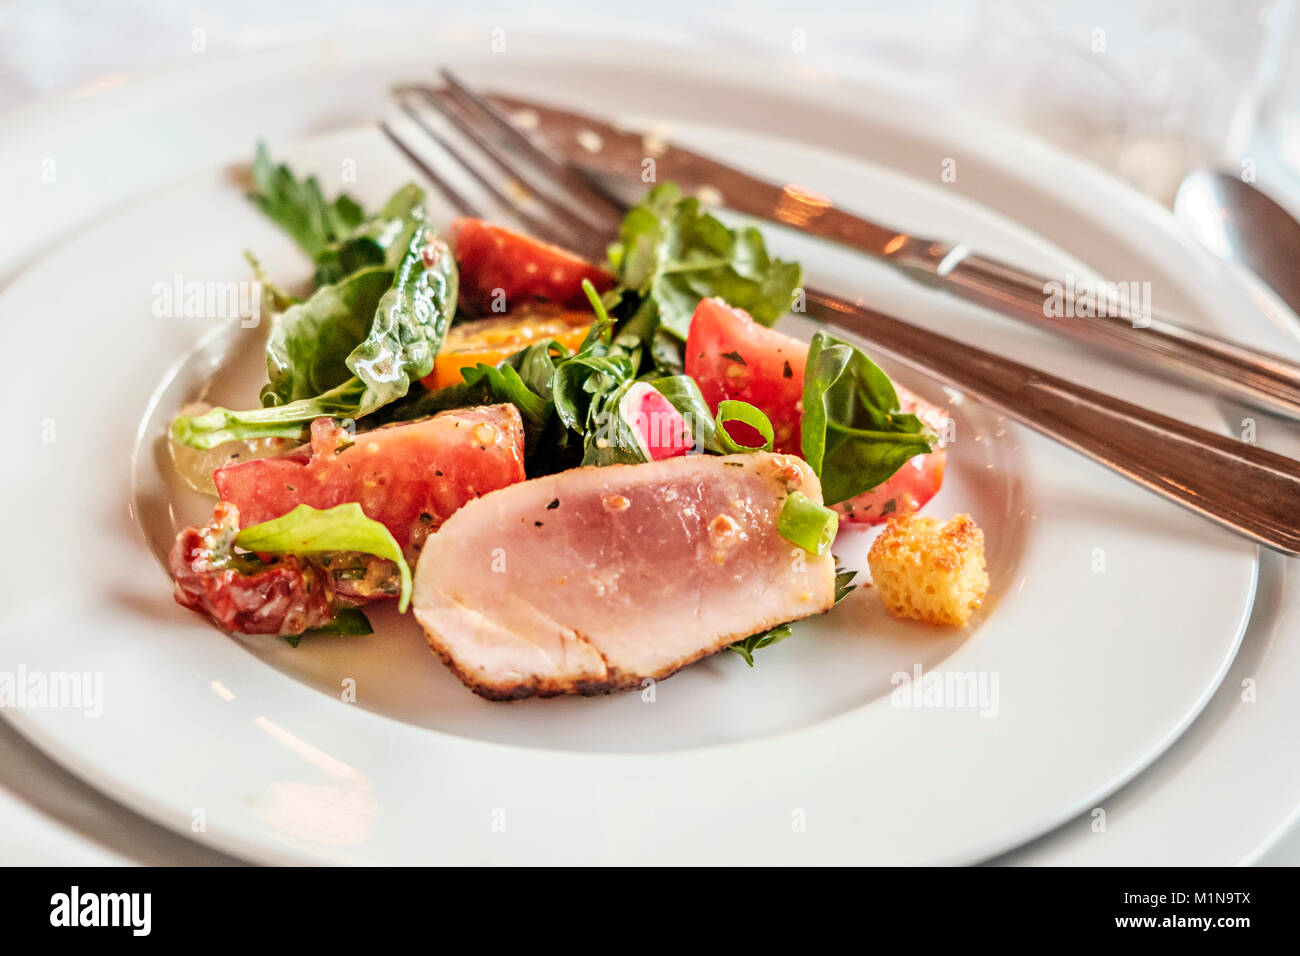 Albacore tuna panzanella salad with grilled red onions, celery, parsley and grainy mustard dressing Stock Photo